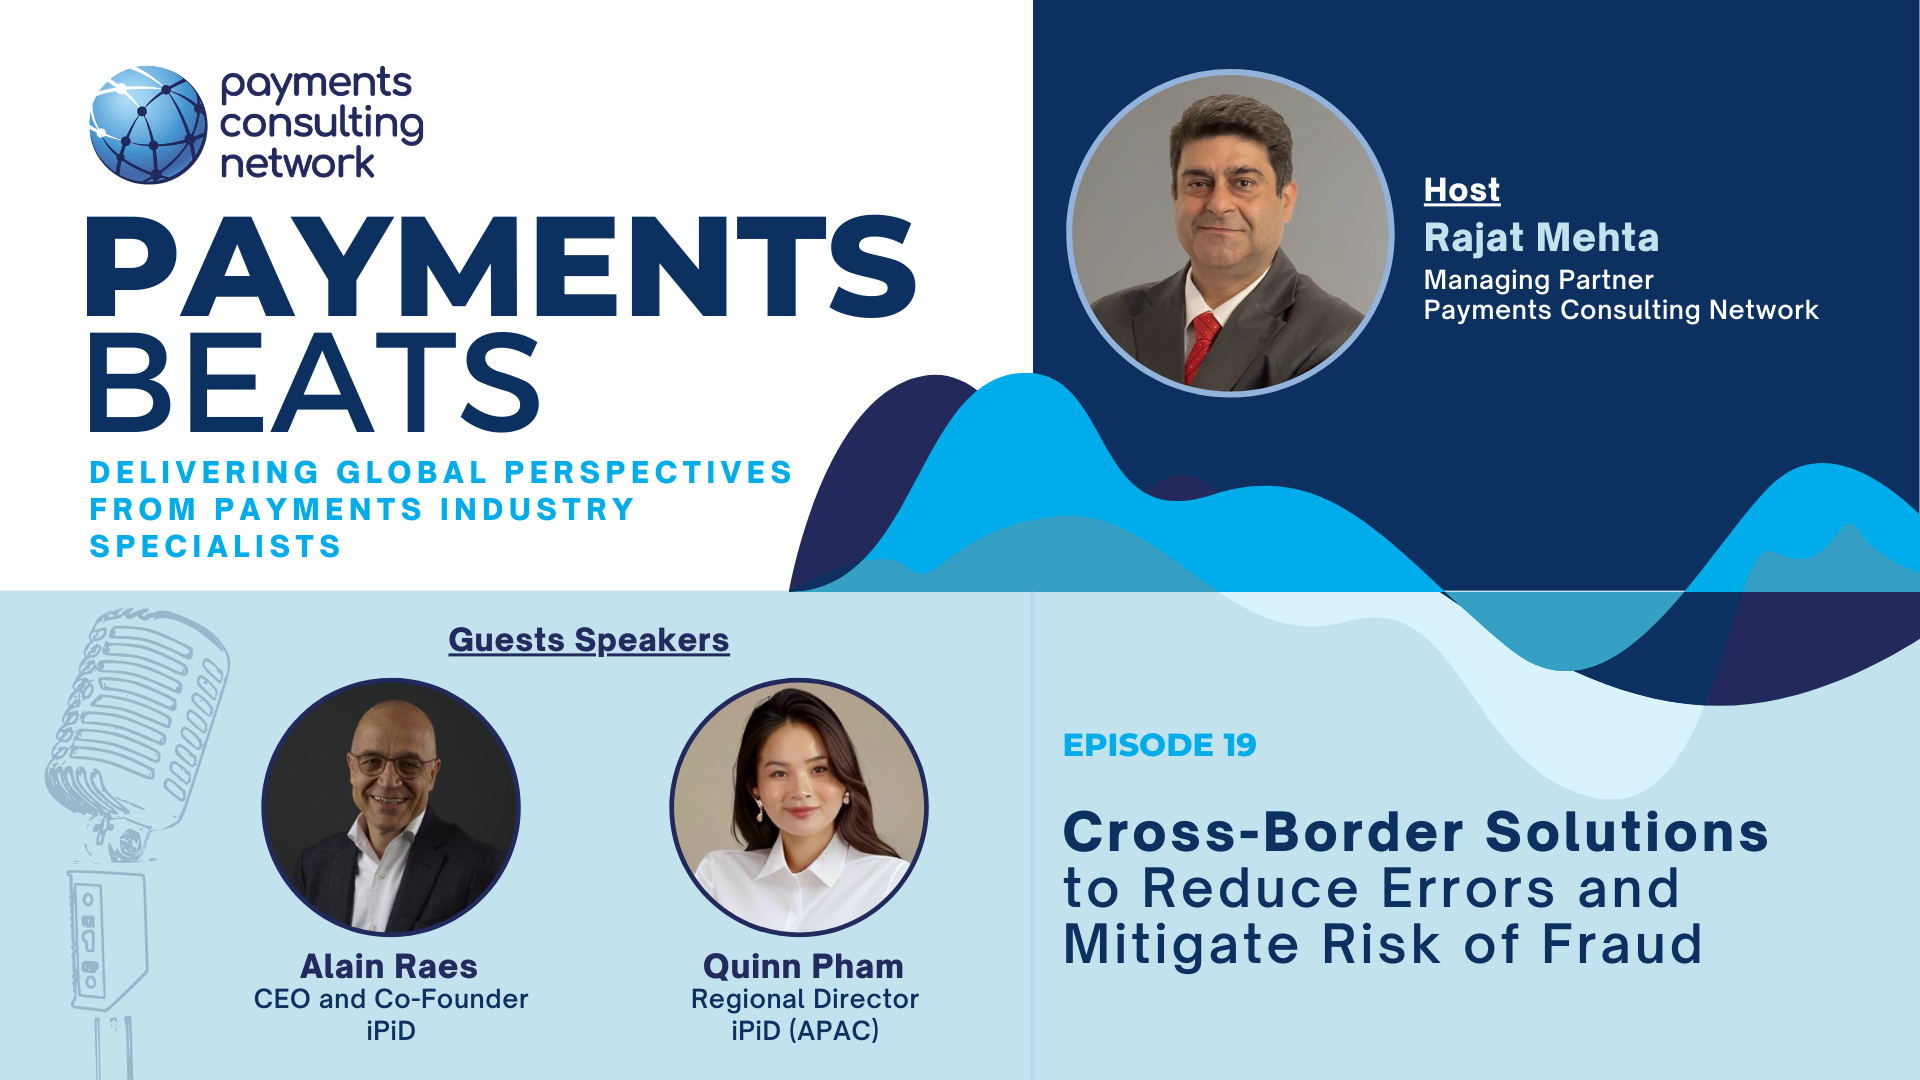 Episode 19 - Cross-Border Solutions to Reduce Errors and Mitigate Risk of Fraud